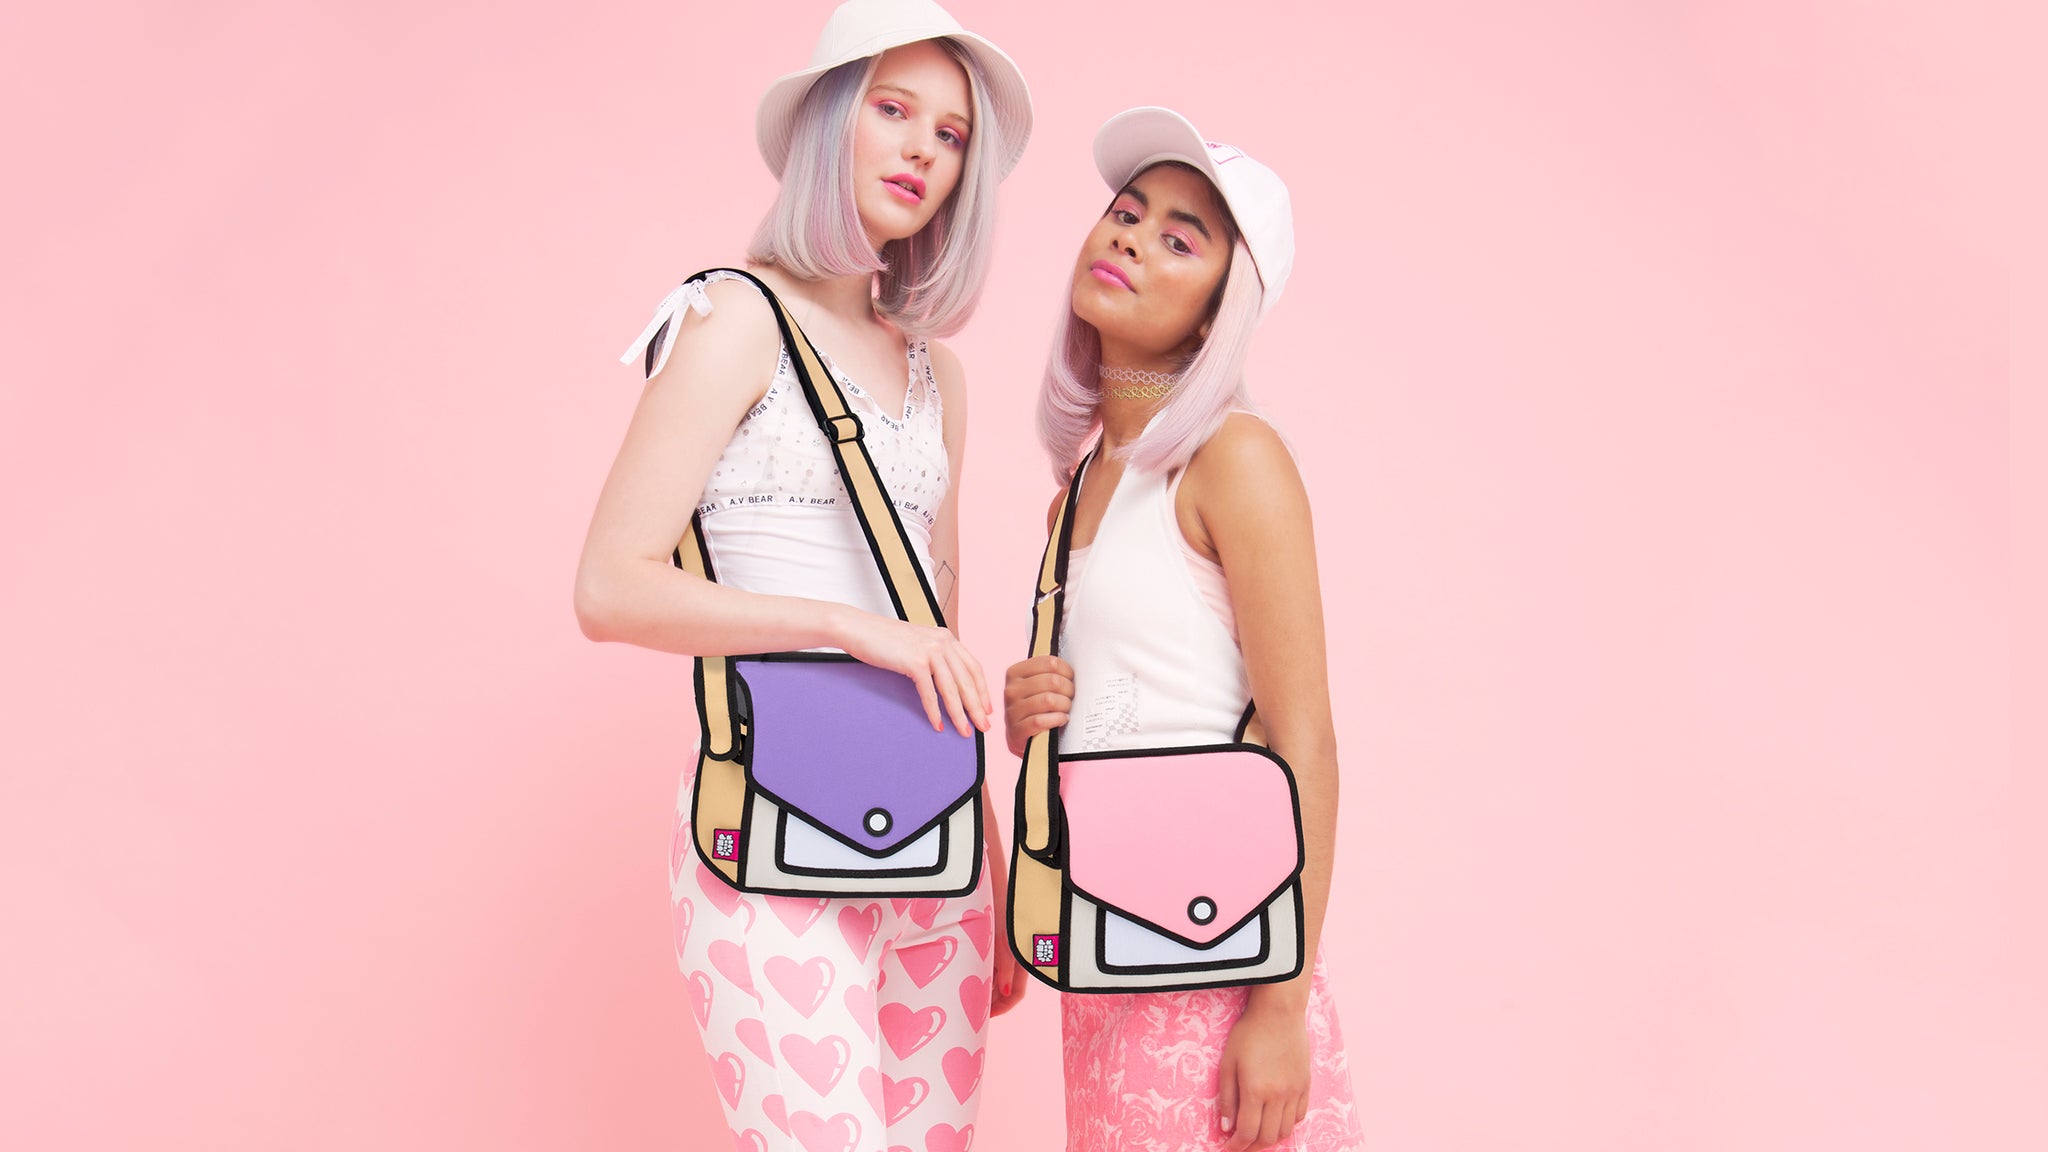 JumpFromPaper Cartoon Bag Pink Collection